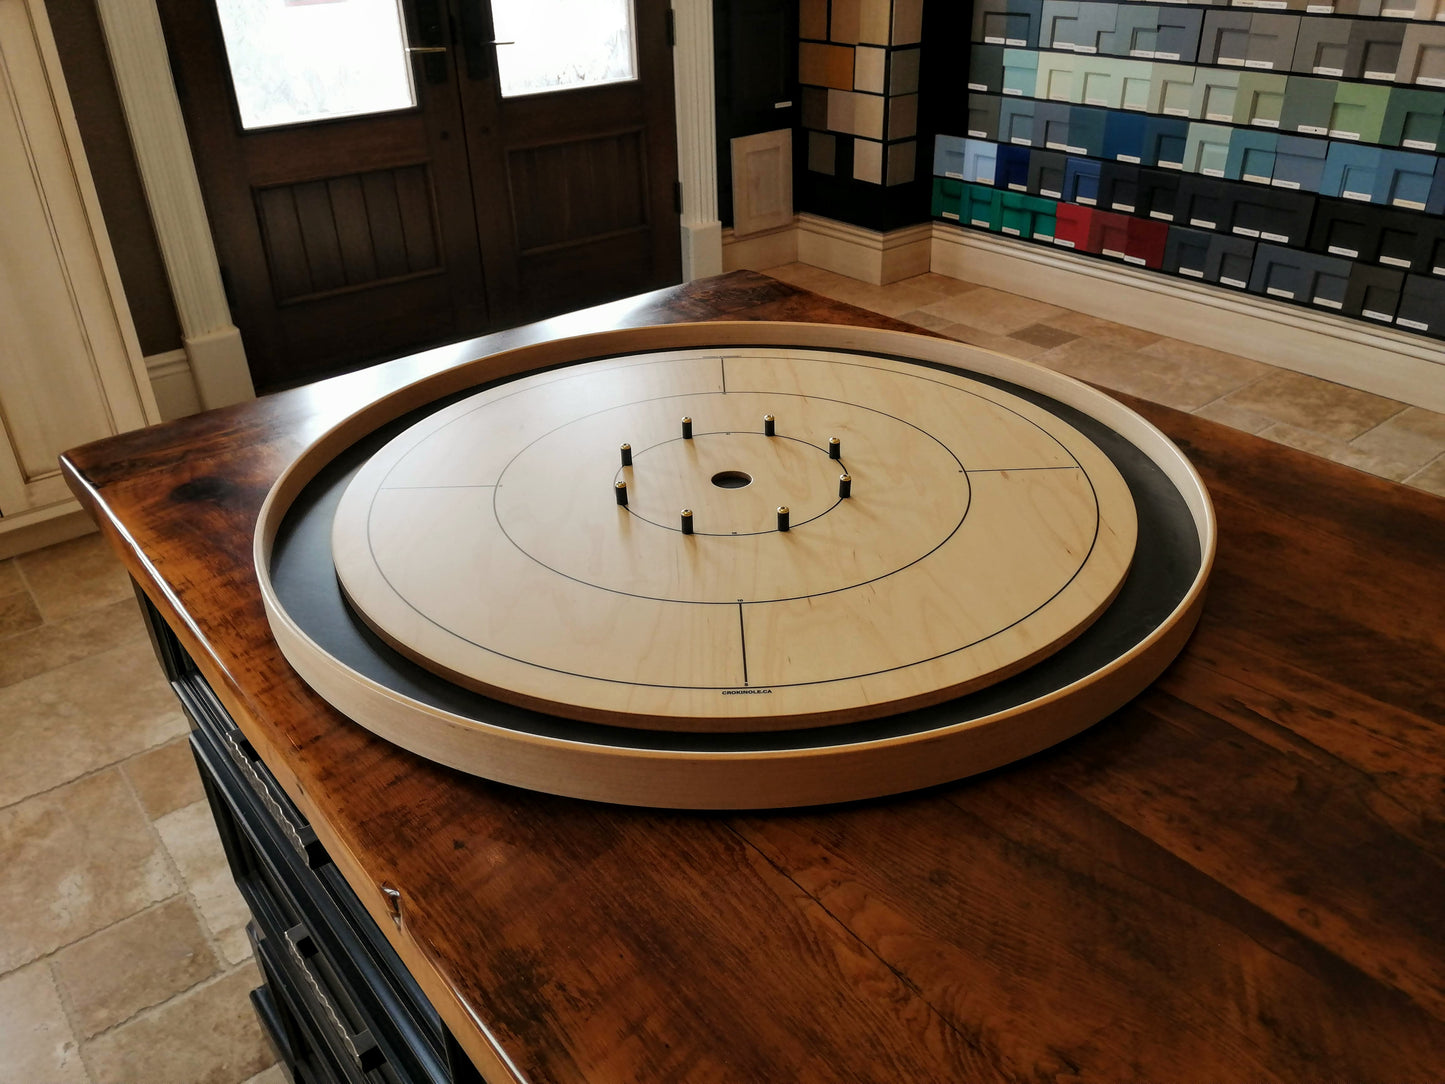 The Crokinole Canada Board (With Branding) - Tournament Board Game Set - Meets NCA Standards